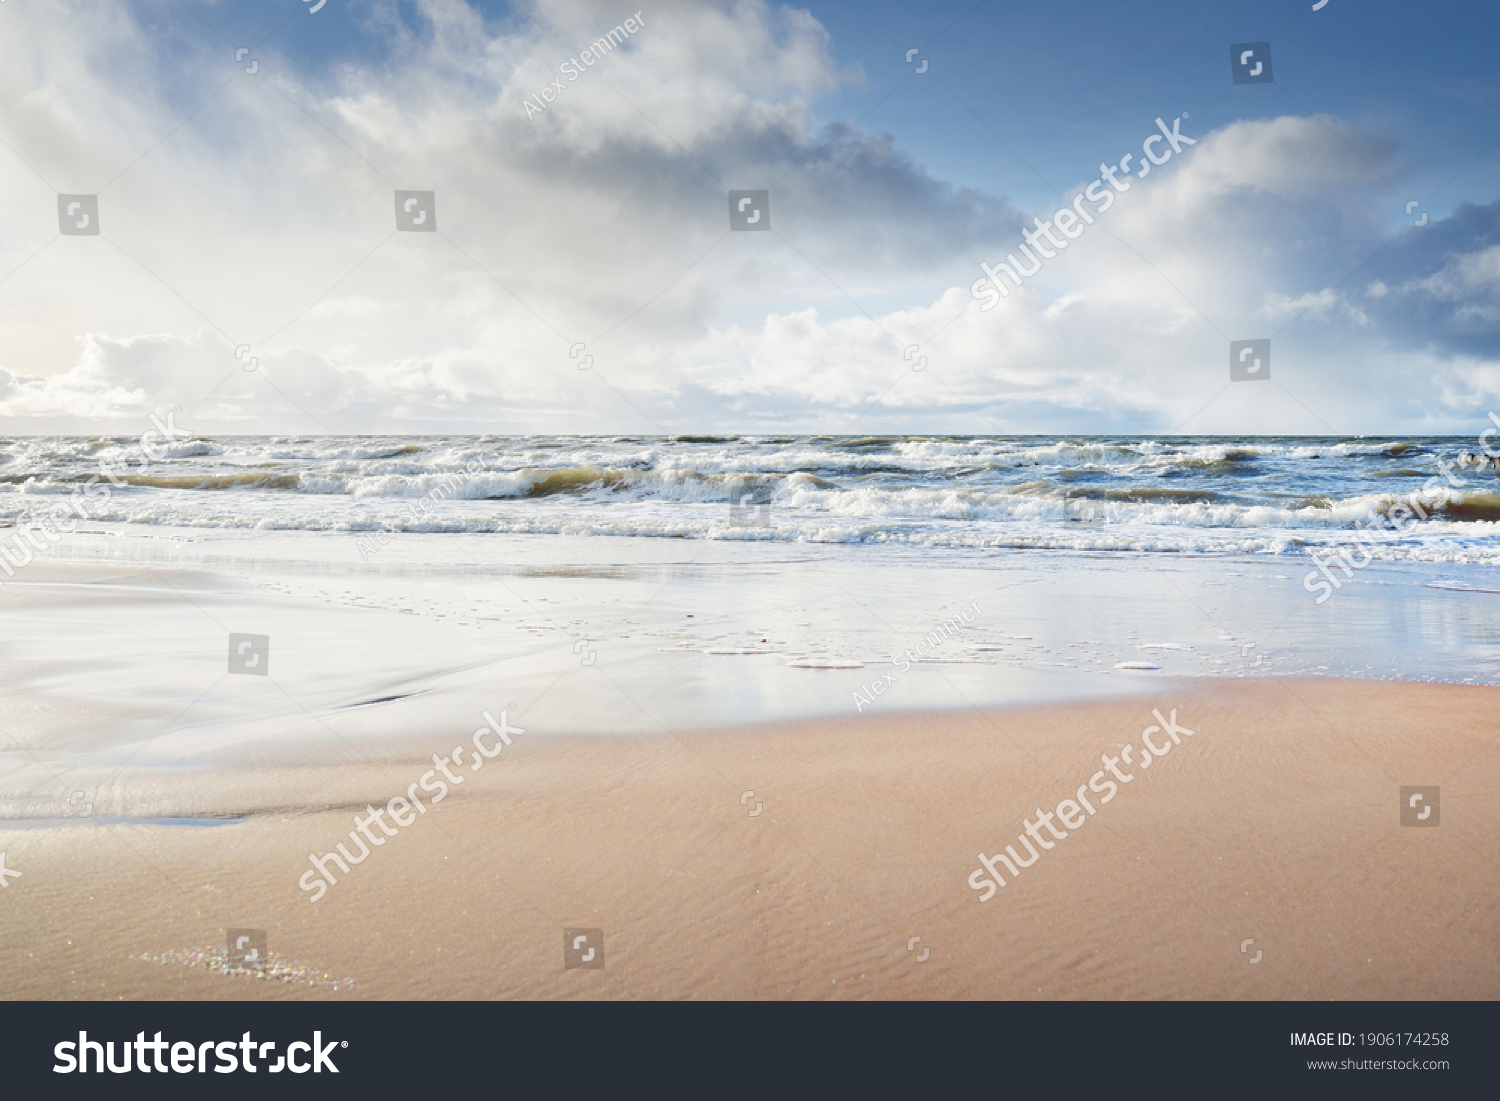 Panoramic view of Baltic sea from sandy shore (sand dunes). Dramatic sky with glowing clouds, sunbeams. Waves, water splashes. Idyllic seascape. Warm winter weather, climate change, nature. Denmark #1906174258